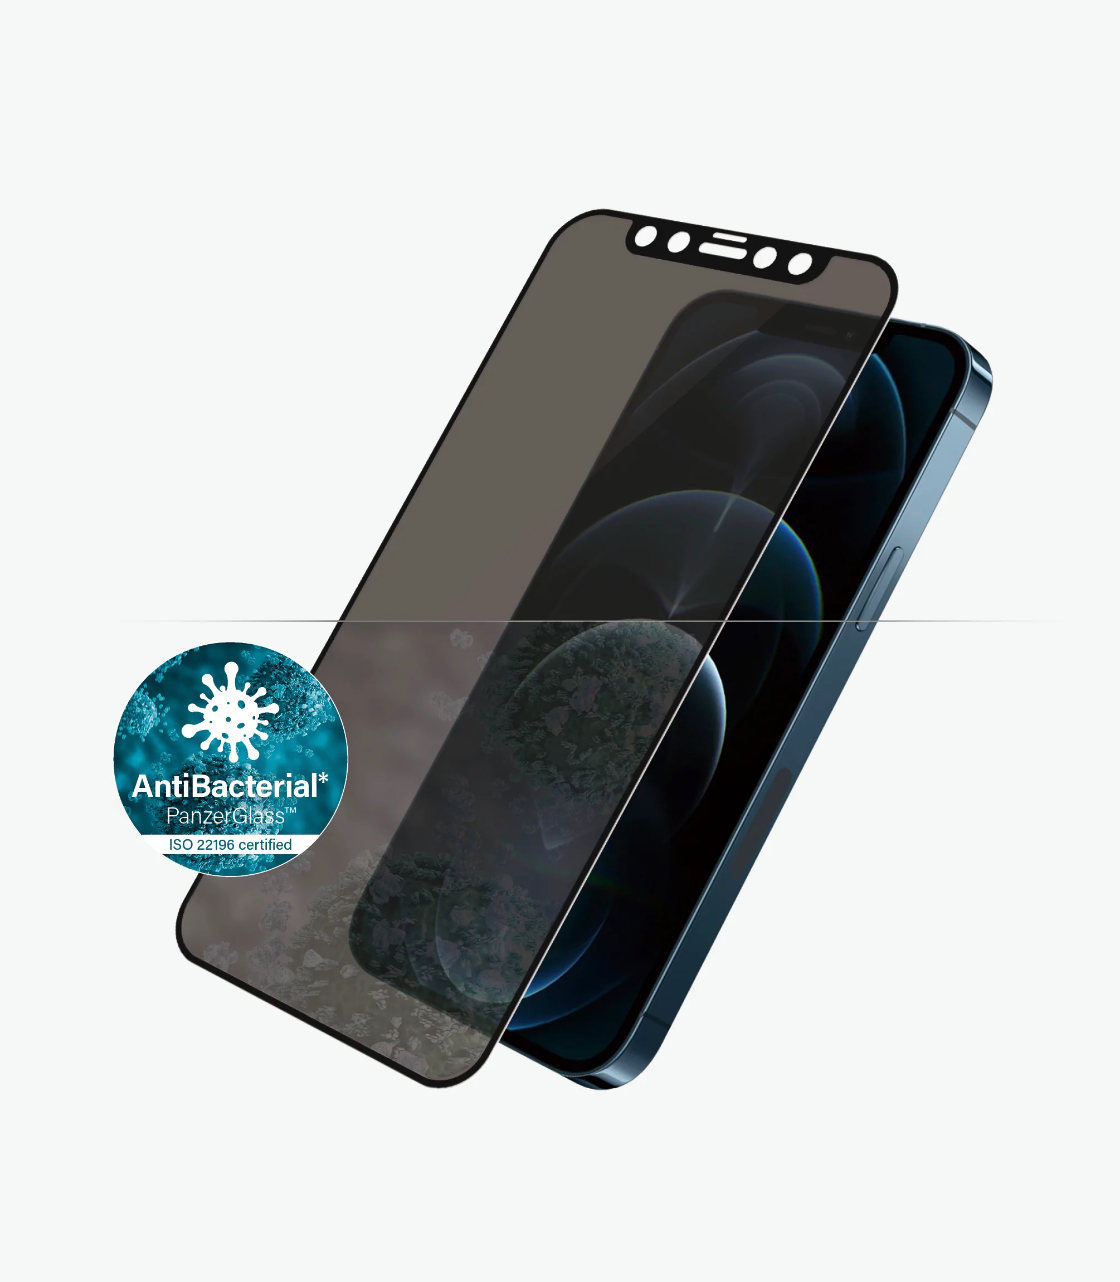 PanzerGlass Case Friendly 2.5D Privacy Tempered Glass for iPhone 12 Pro Max (Black) 